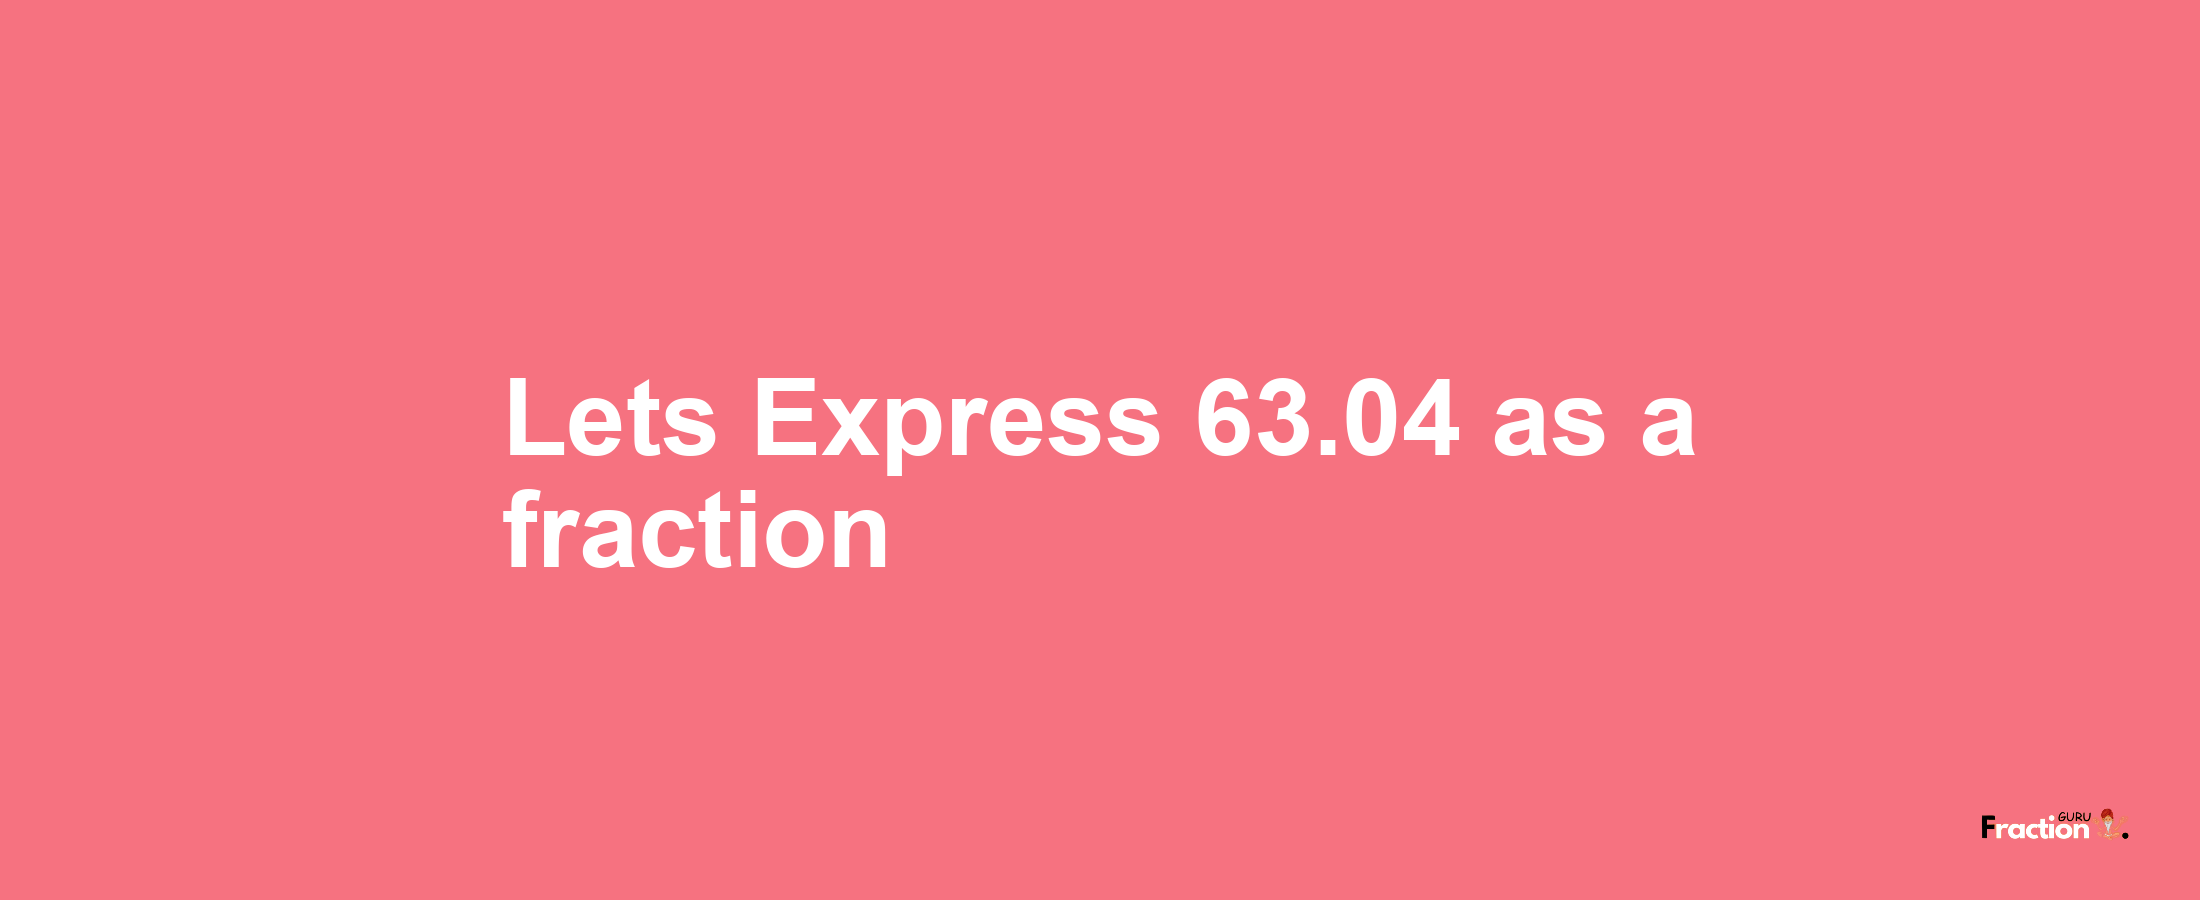 Lets Express 63.04 as afraction